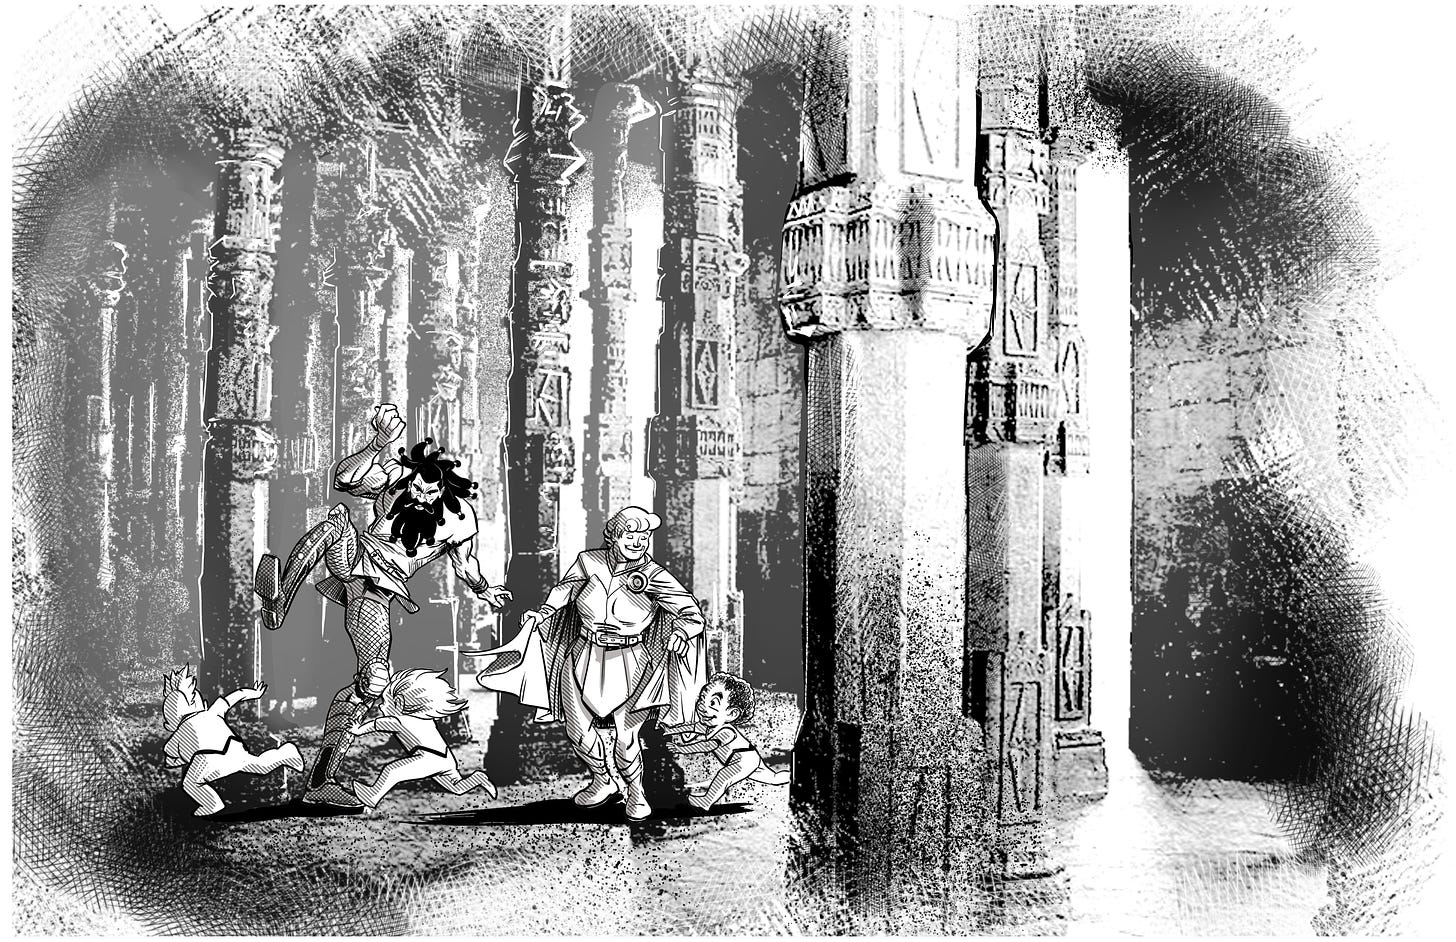 An image from the prologue.